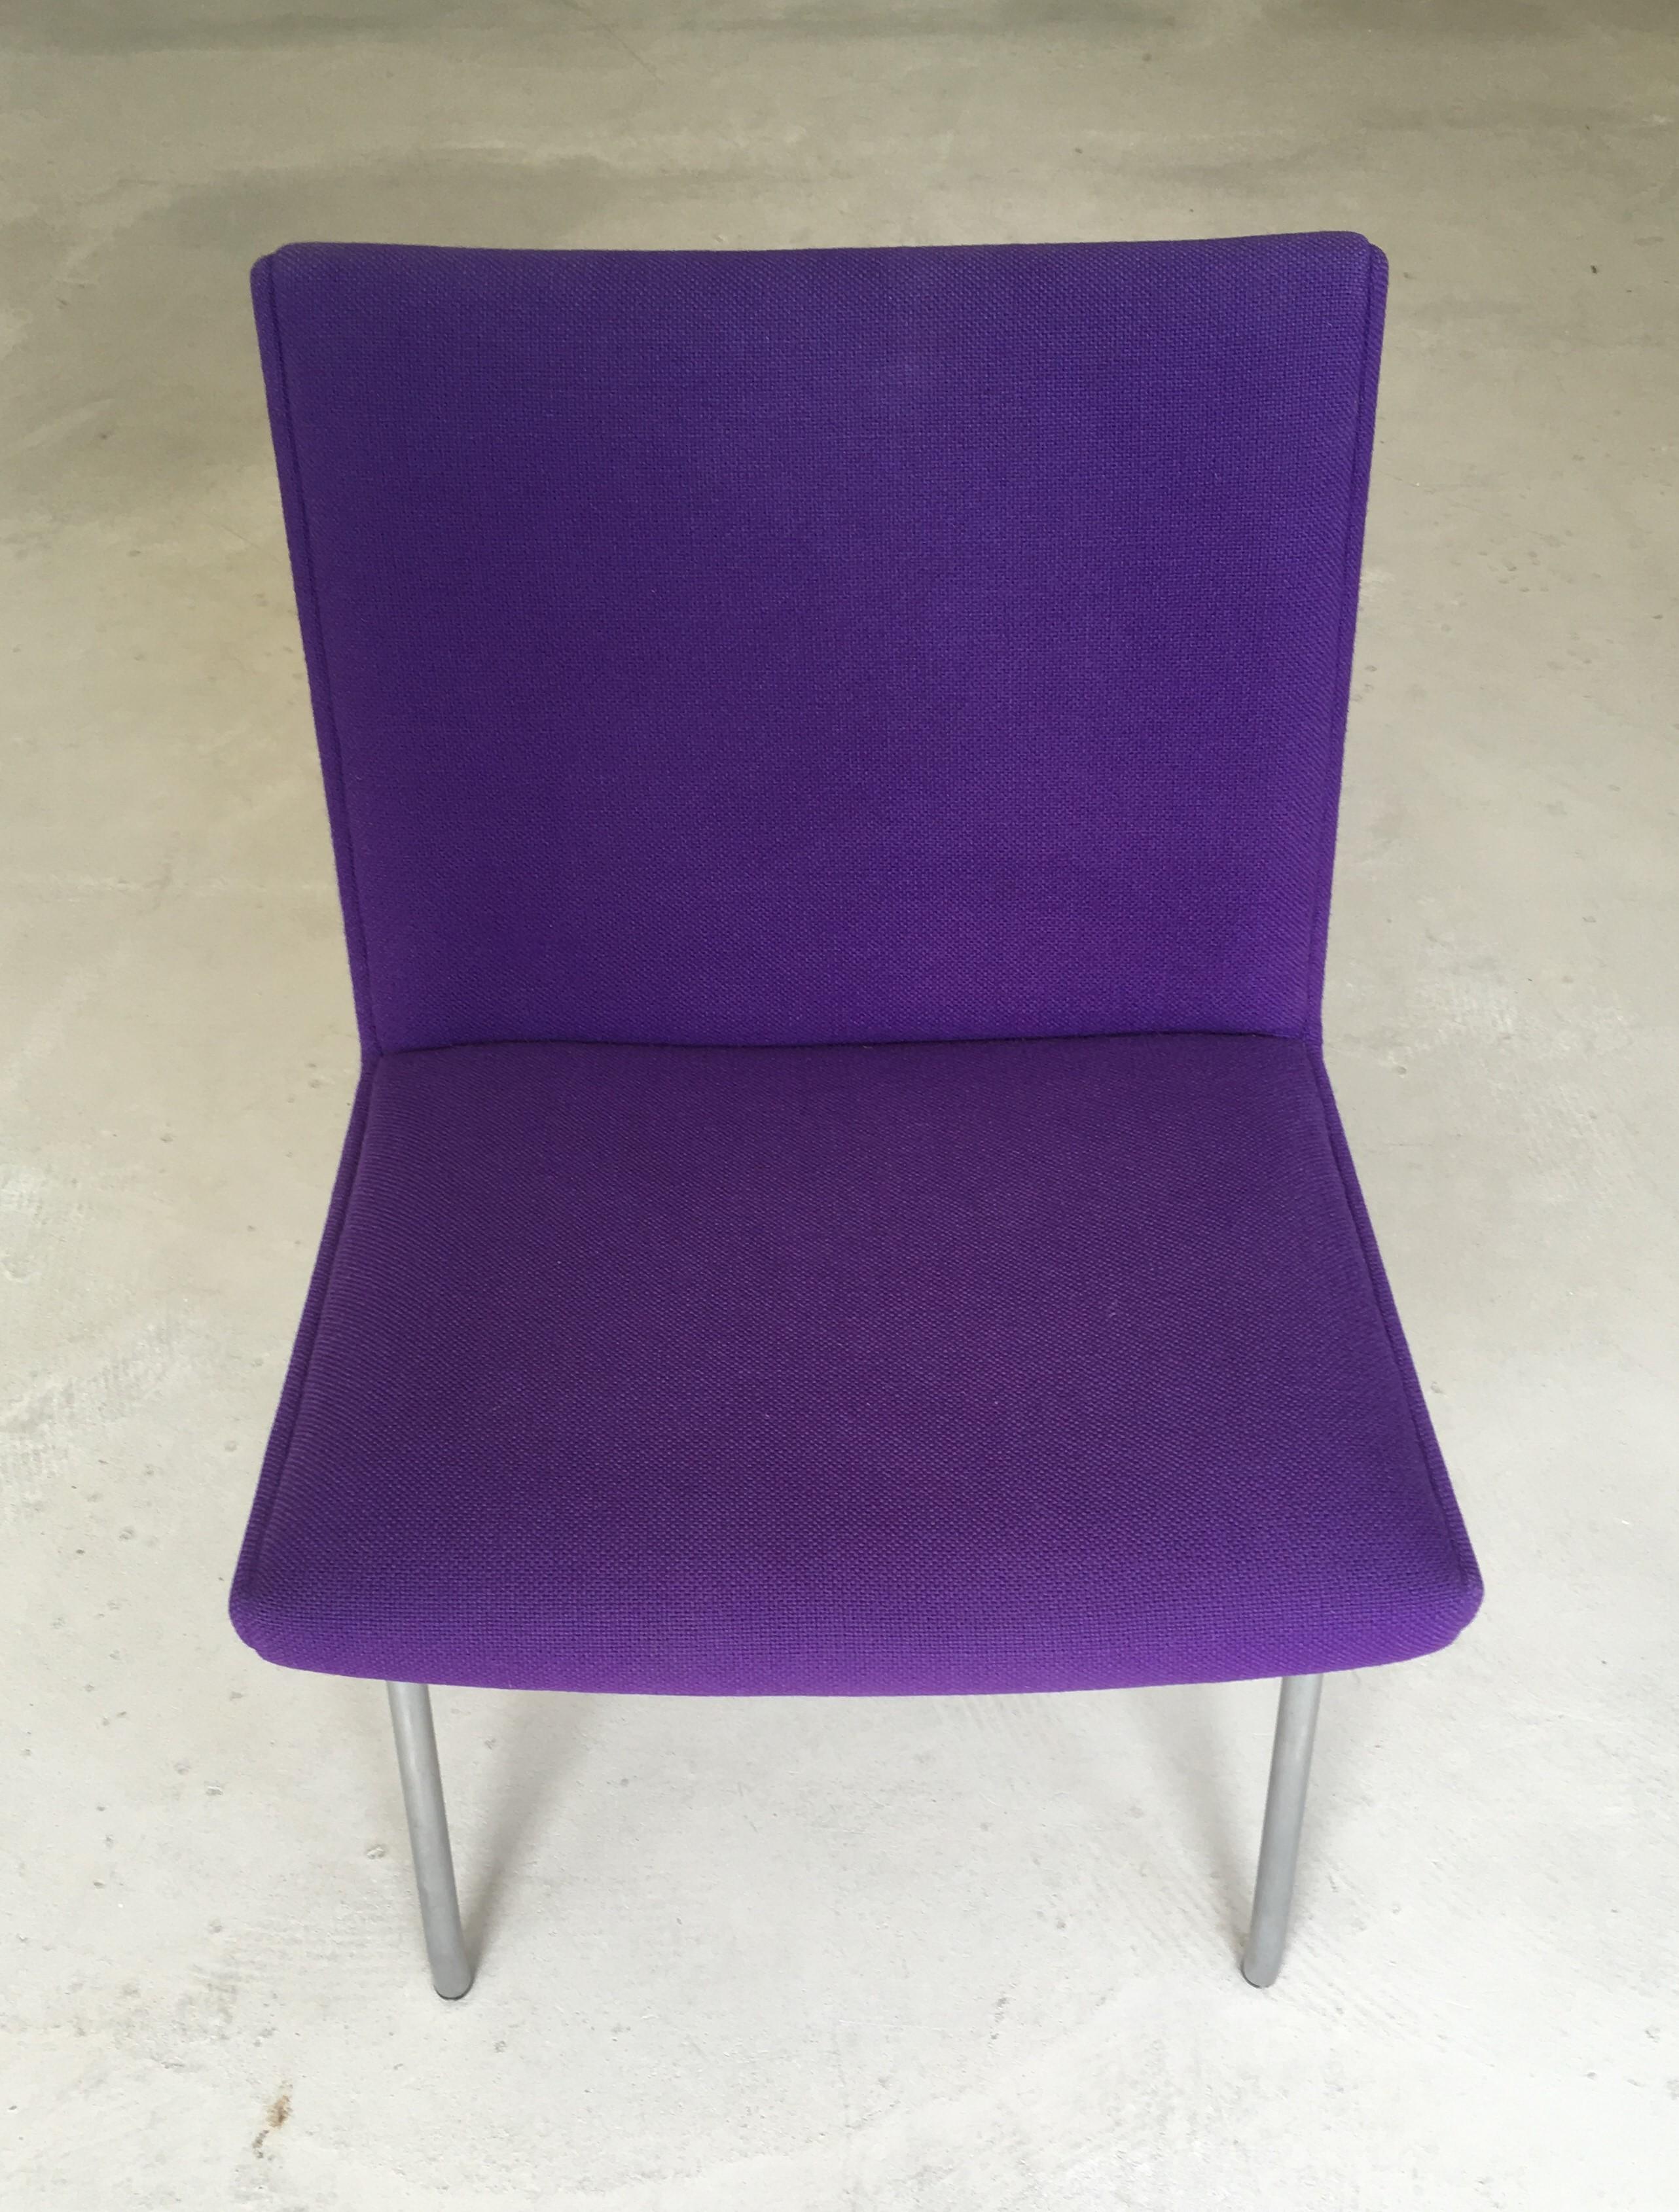 Danish Hans J. Wegner airport chair by AP. Stolen reupholstered in purple fabric

Exceptional modern chair. Of its time designed in 1958, on tubular-steel frames. Seat have been reupholstered with purple Kvadrat Hallingdal 65.

Although not